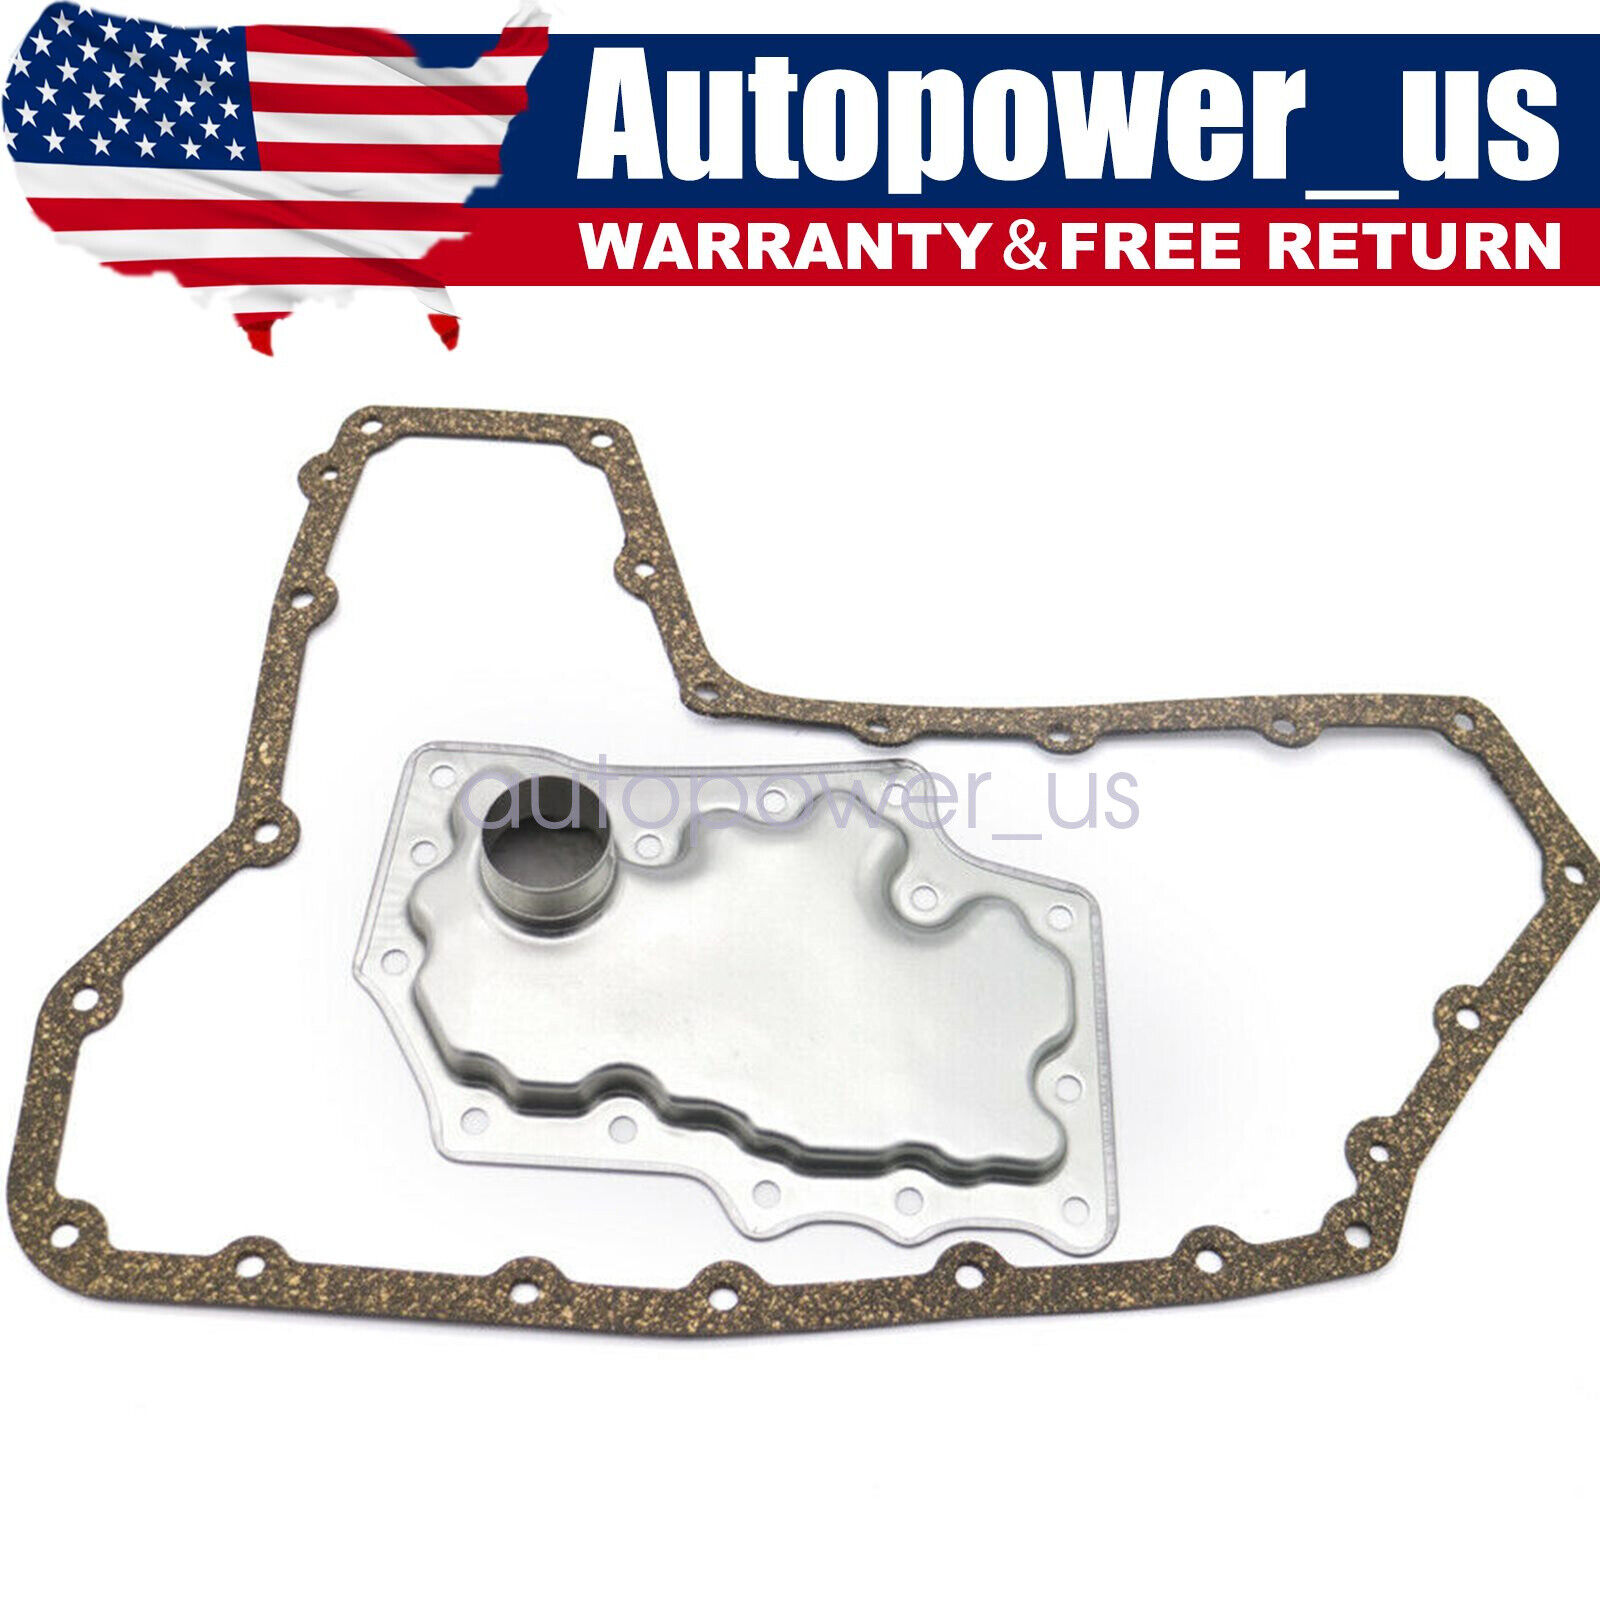 Auto Transmission Filter & Gasket Kit For Nissan Altima Maxima Quest Murano 3.5L